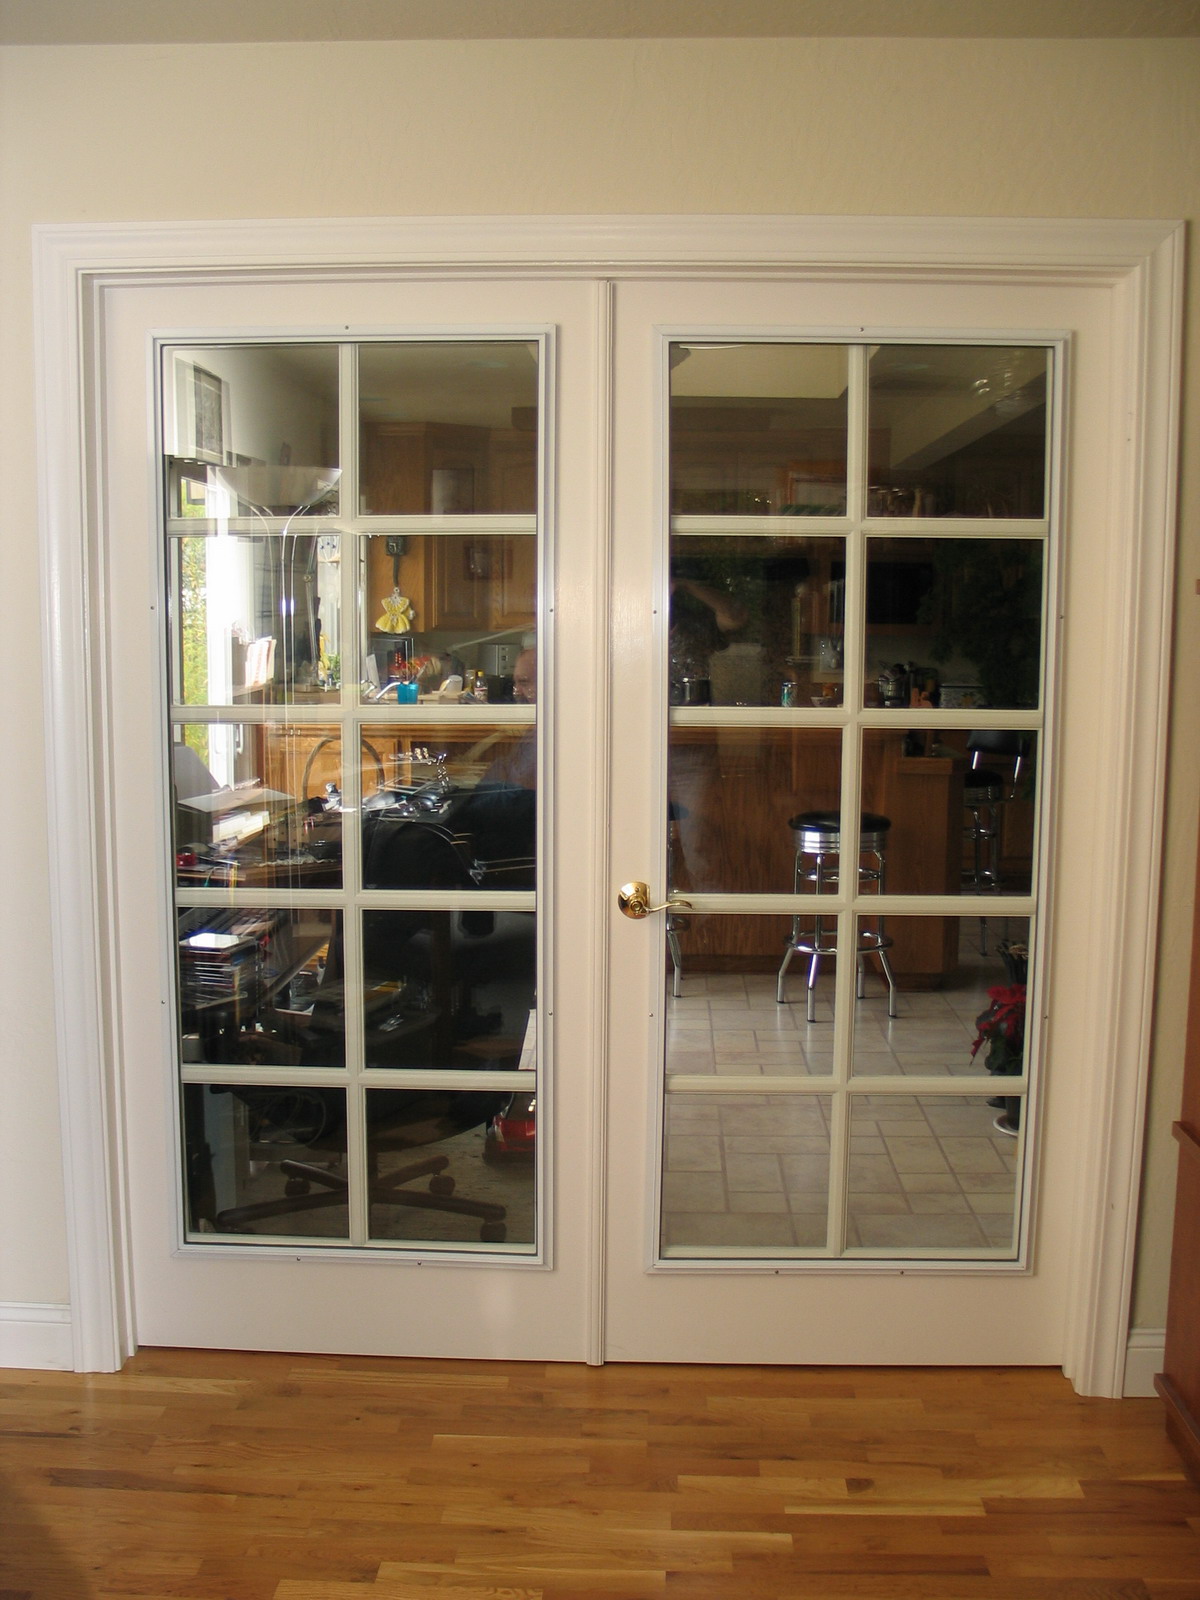 Beautify your home with French doors interior 18 inches | Interior ...